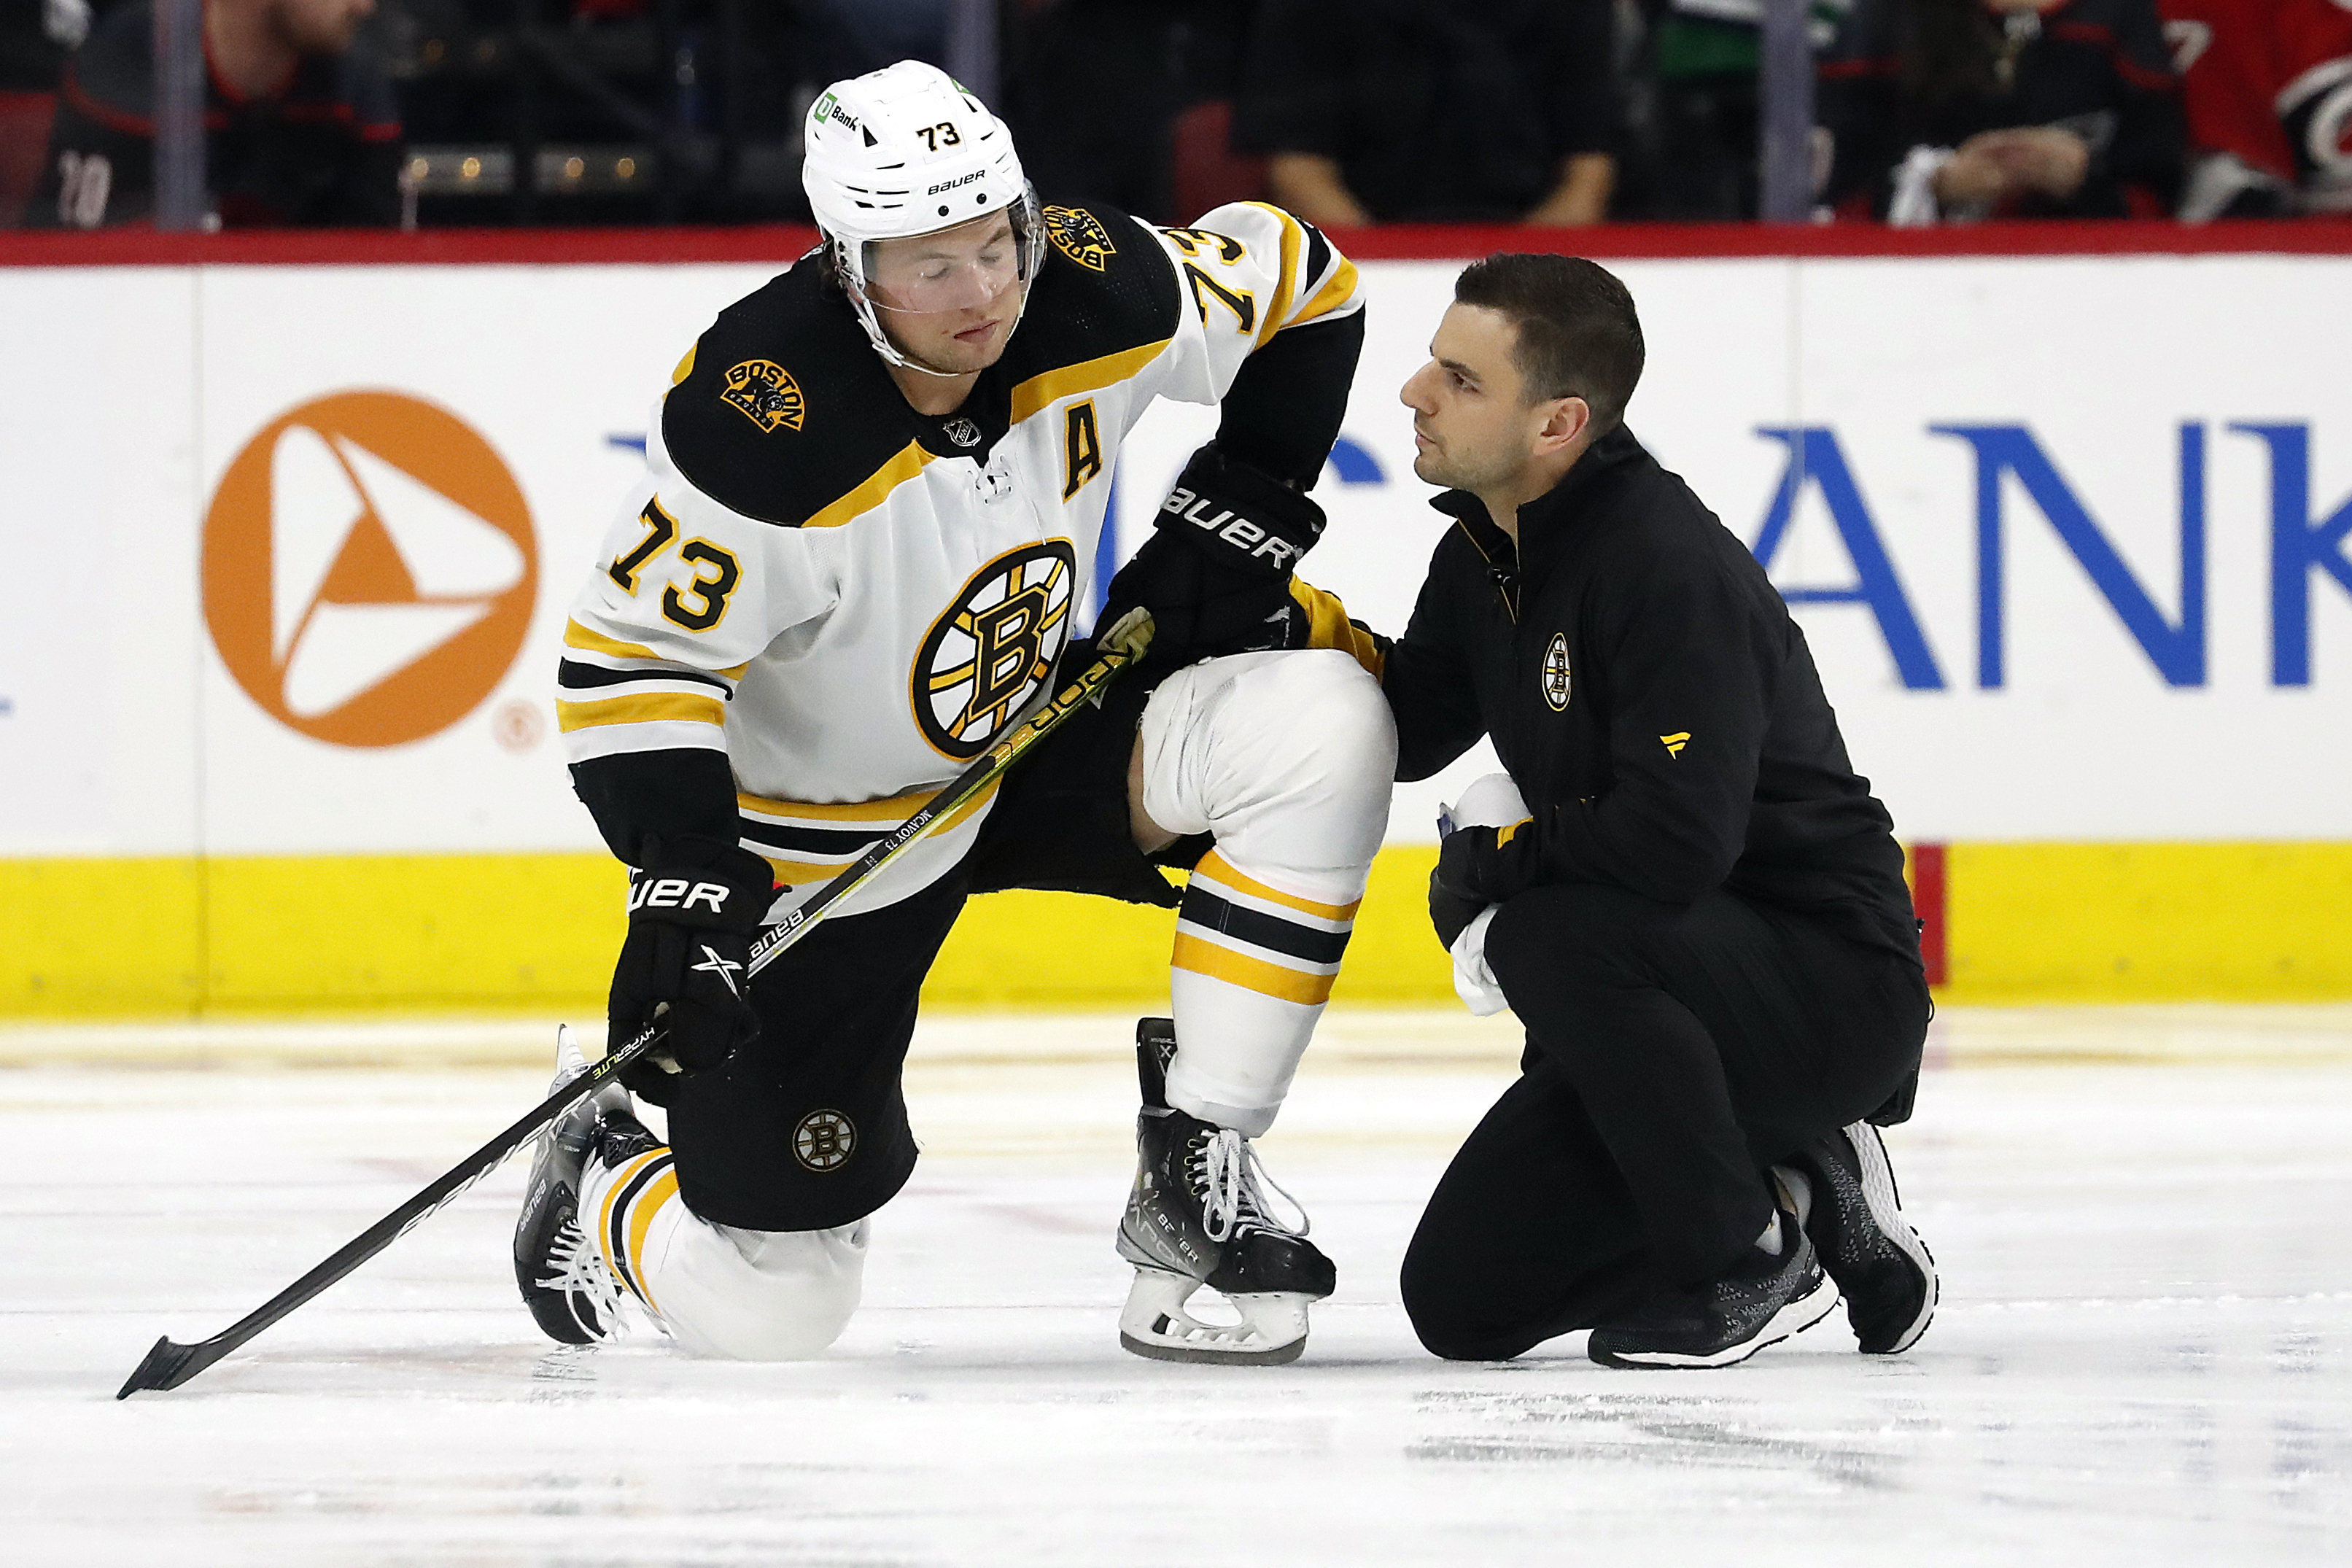 Life-changing news for Bruins' Charlie McAvoy - HockeyFeed